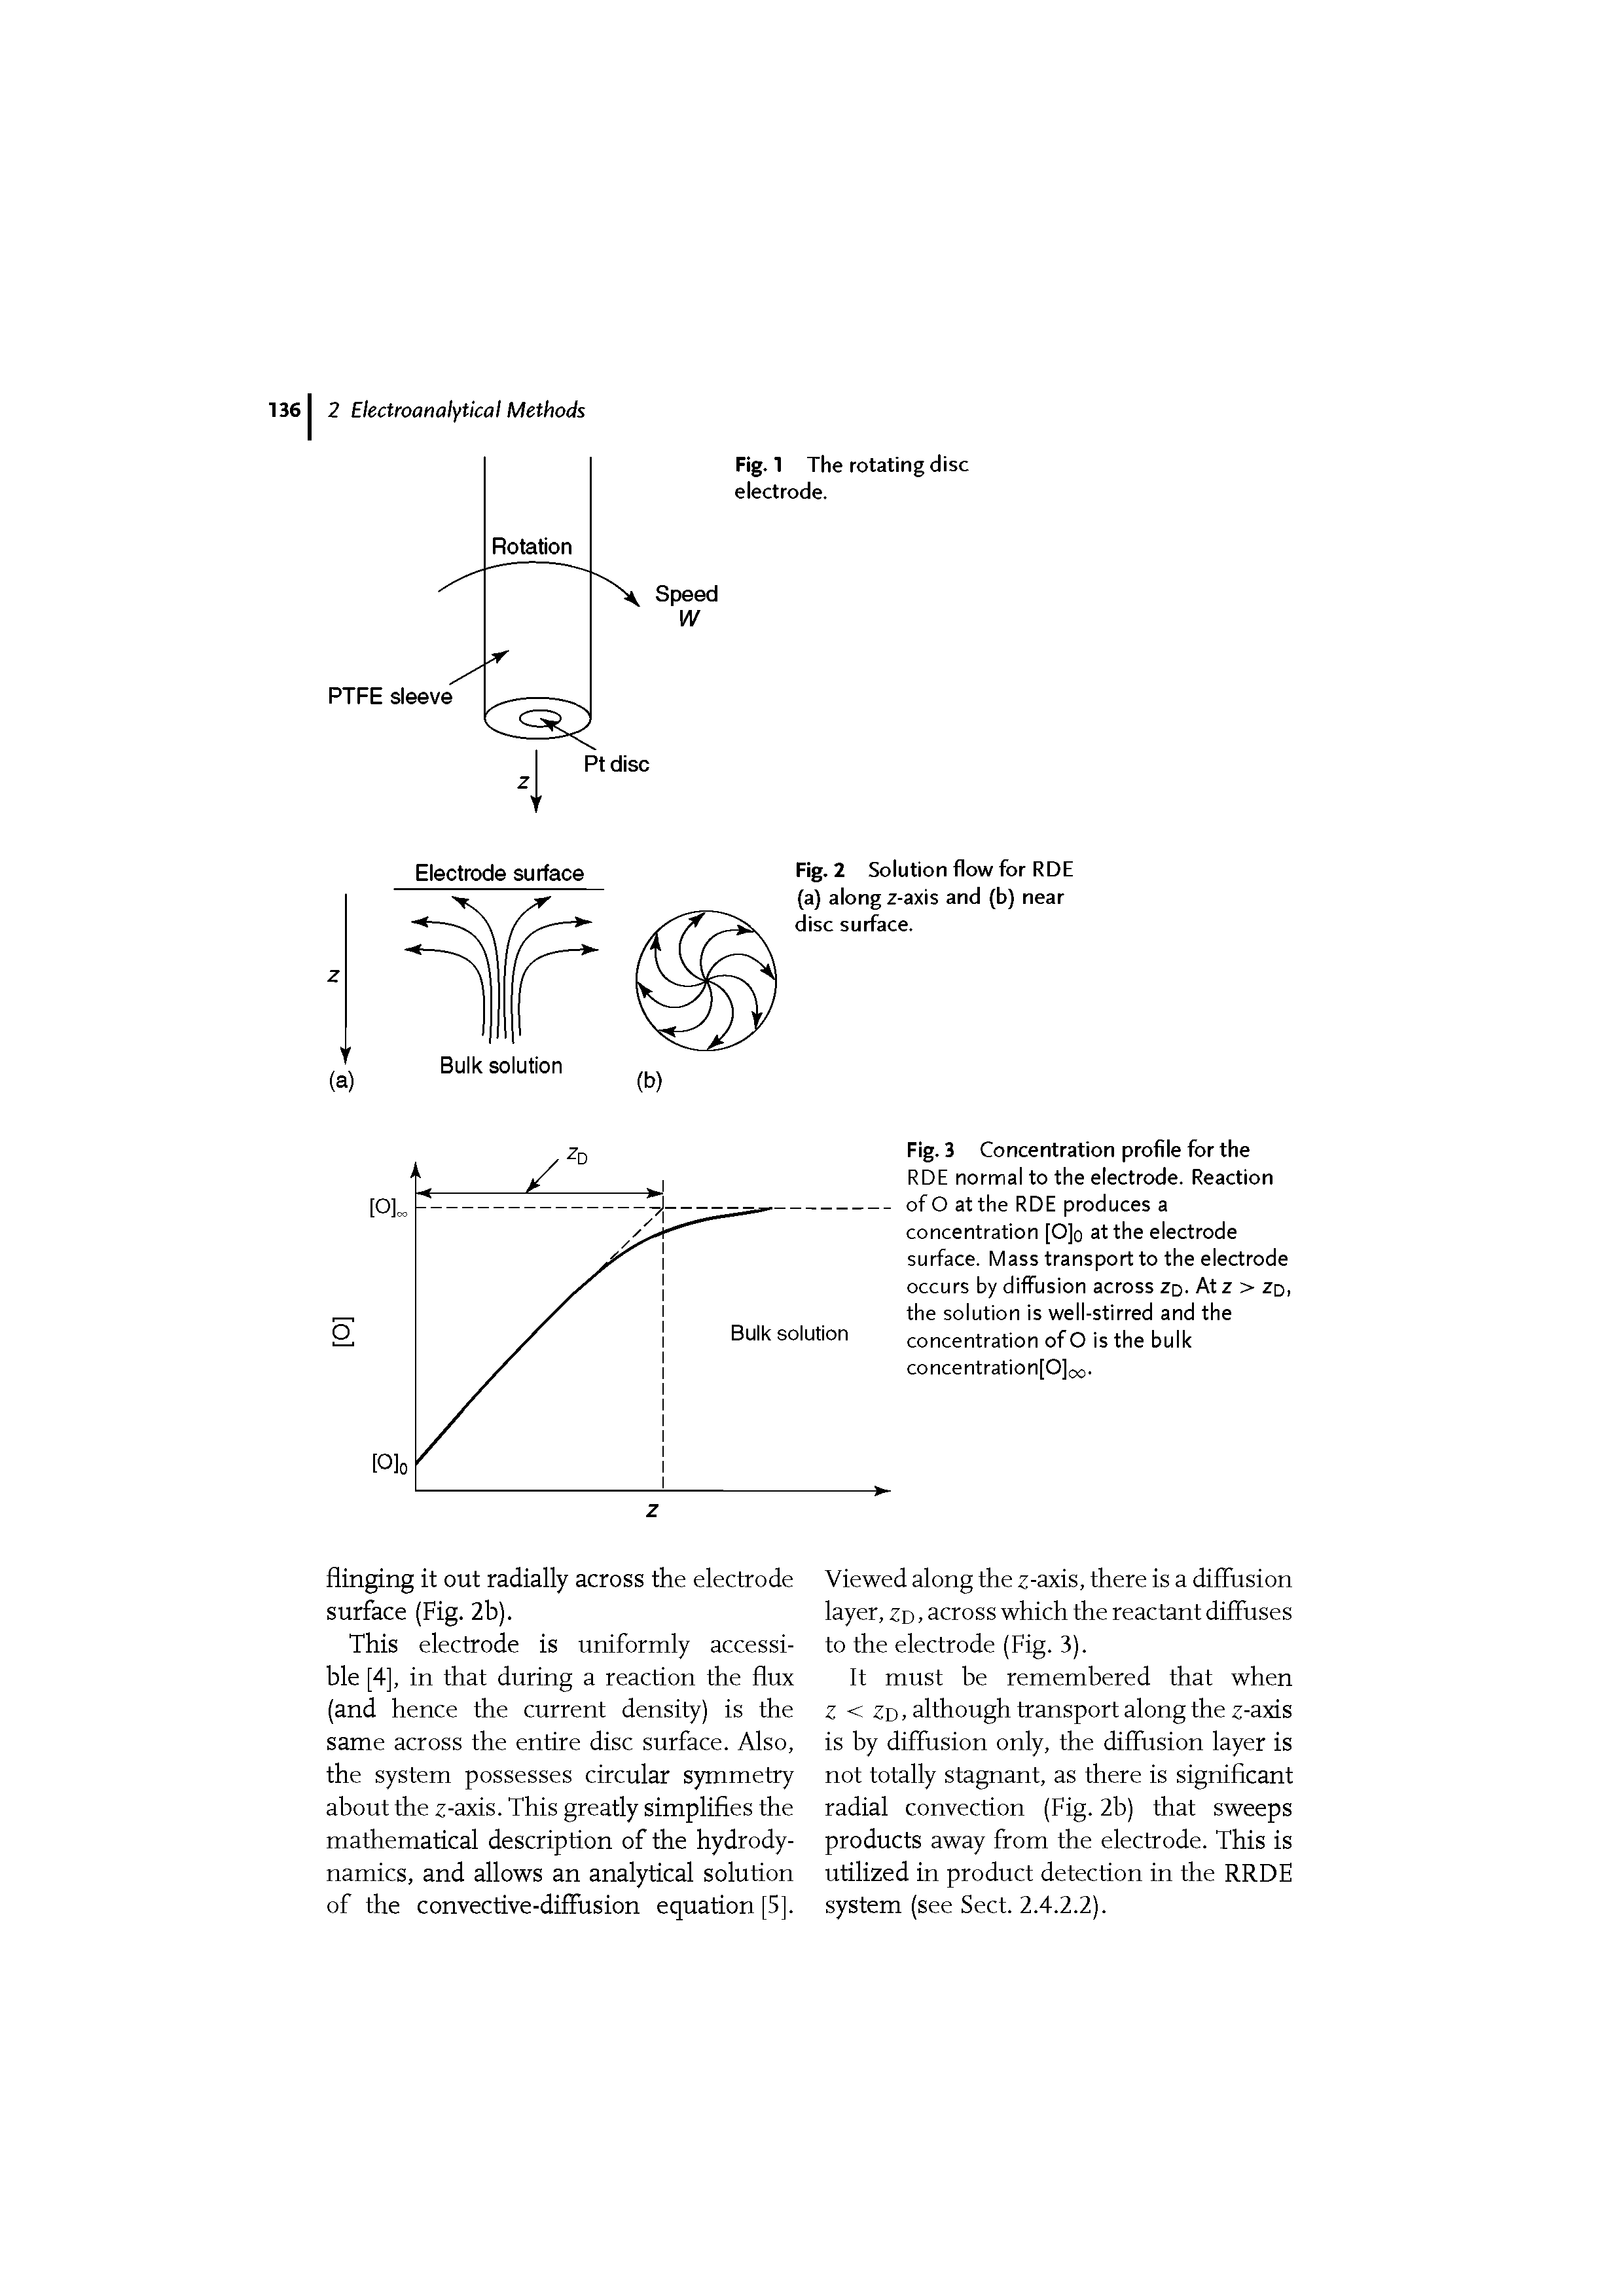 Fig. 3 Concentration profile for the RDE normal to the electrode. Reaction of O at the RDE produces a concentration [O]o at the electrode surface. Mass transport to the electrode occurs by diffusion across zd- Atz > zd, the solution is well-stirred and the concentration of O is the bulk concentration[0]co-...